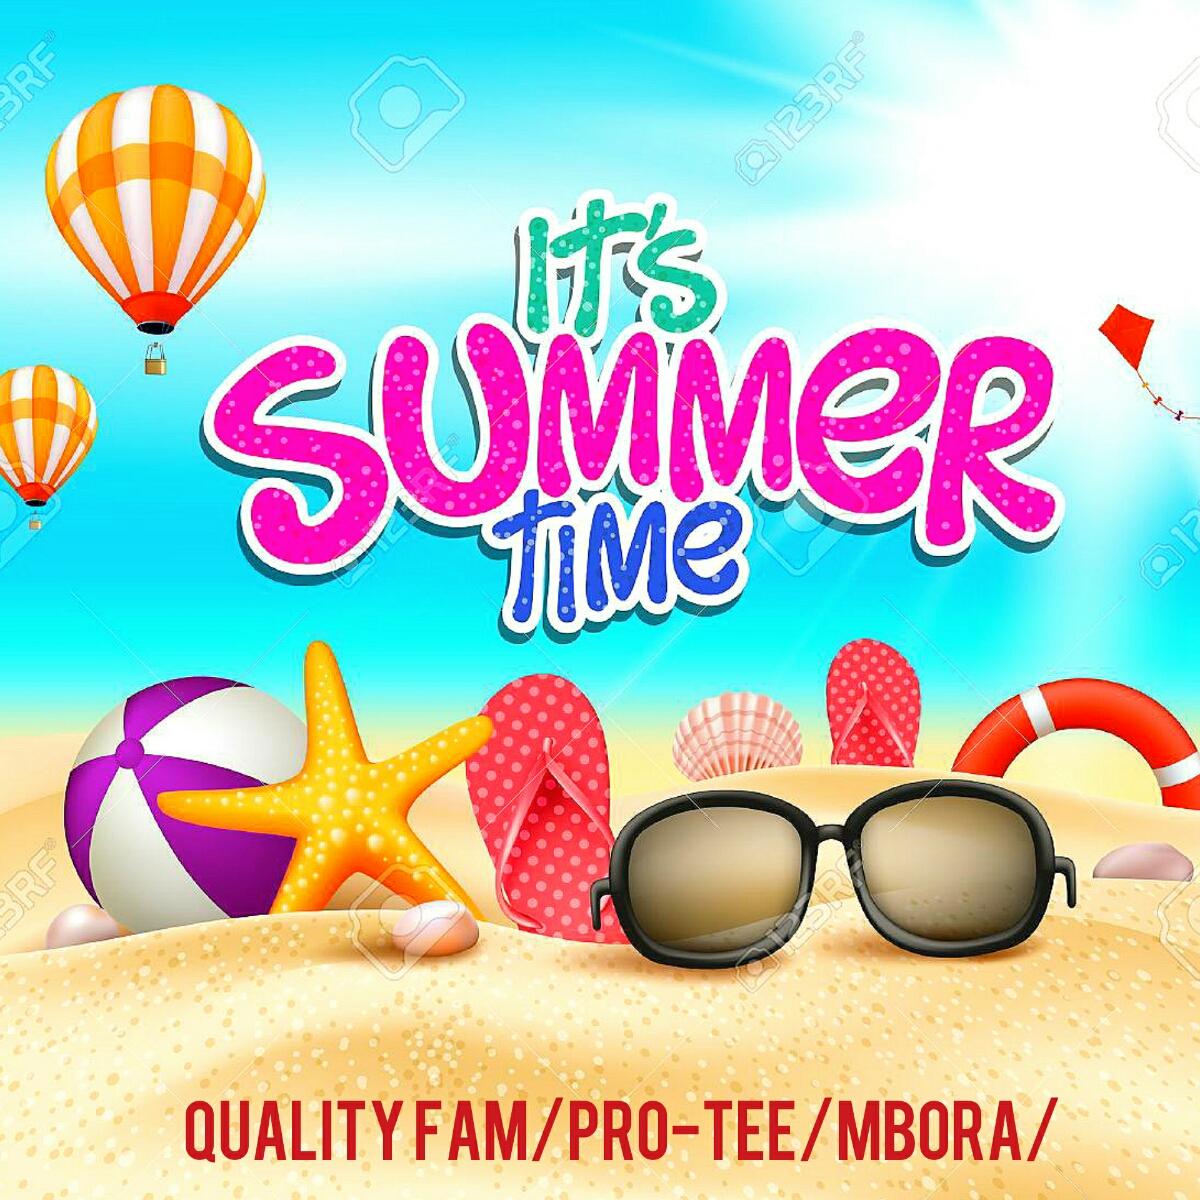 Pro-Tee, Quality Fam & Mbora - Summer Time (Heaven Or Hell 2)